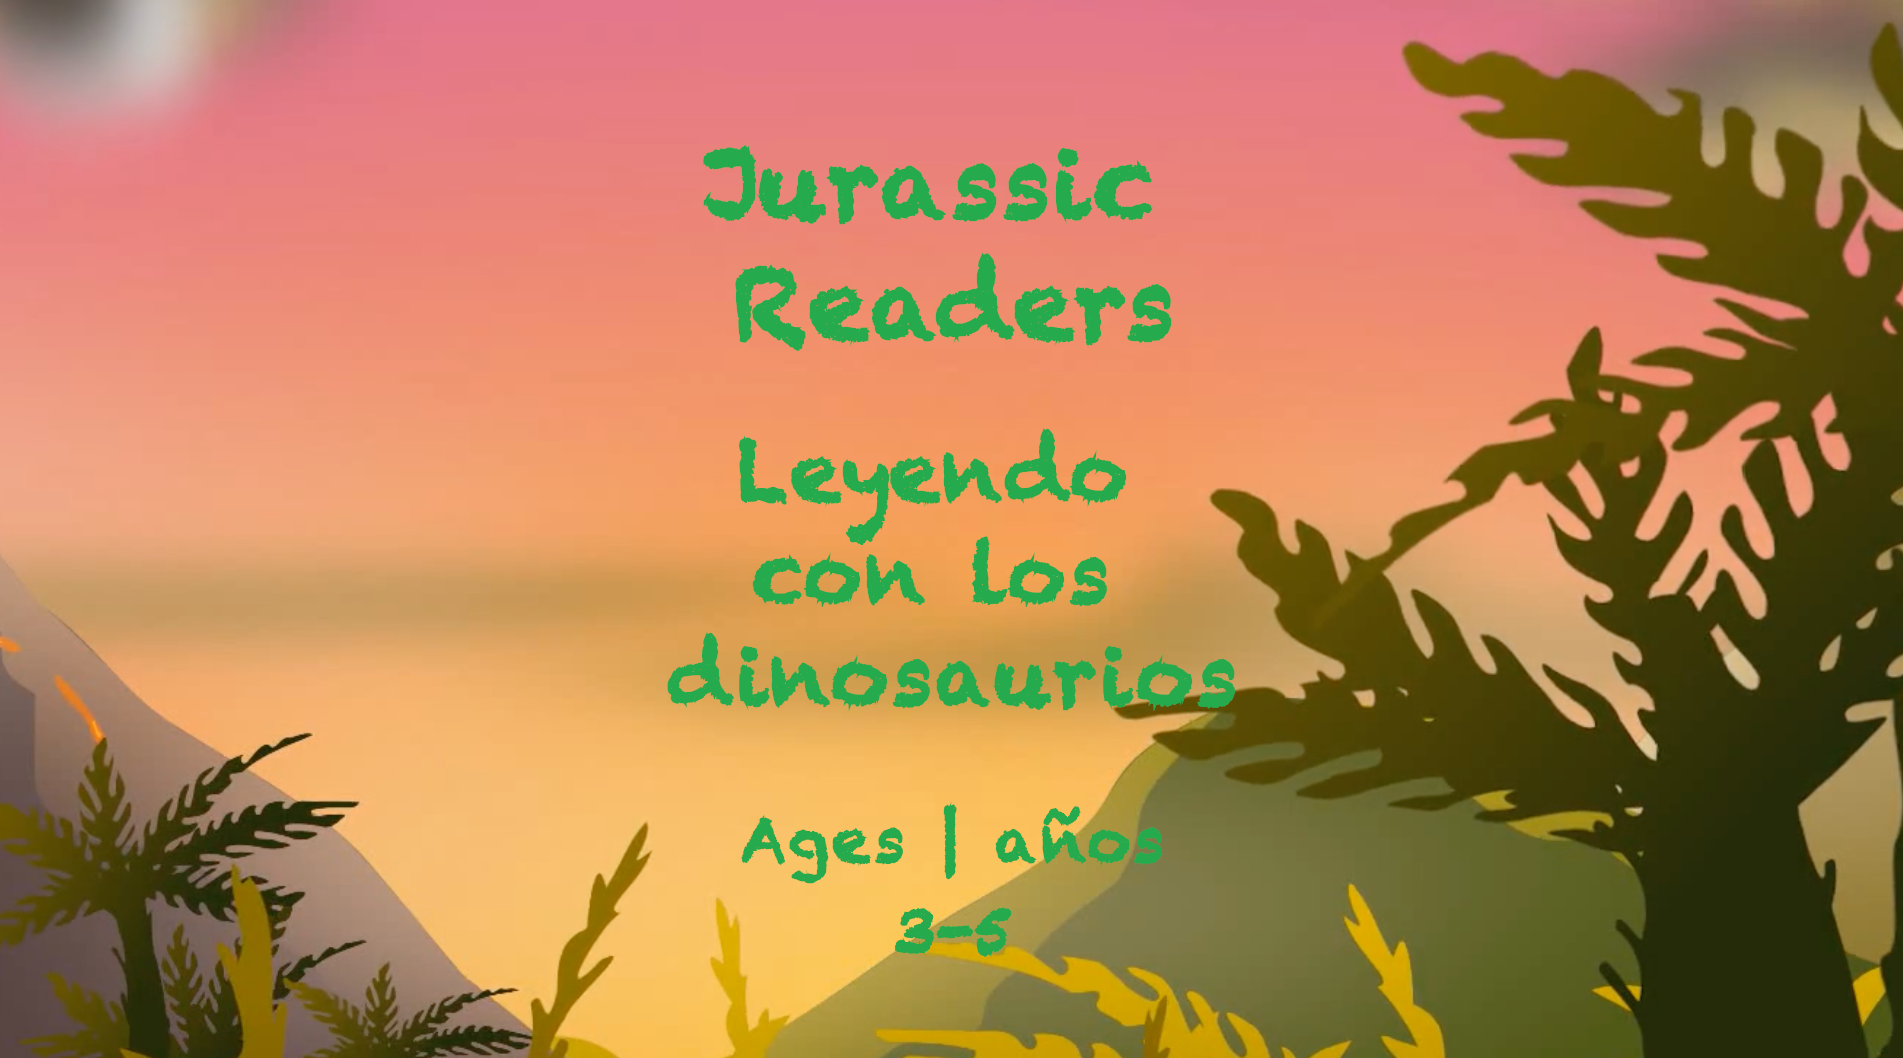 Jurassic Readers for 3-5 year olds